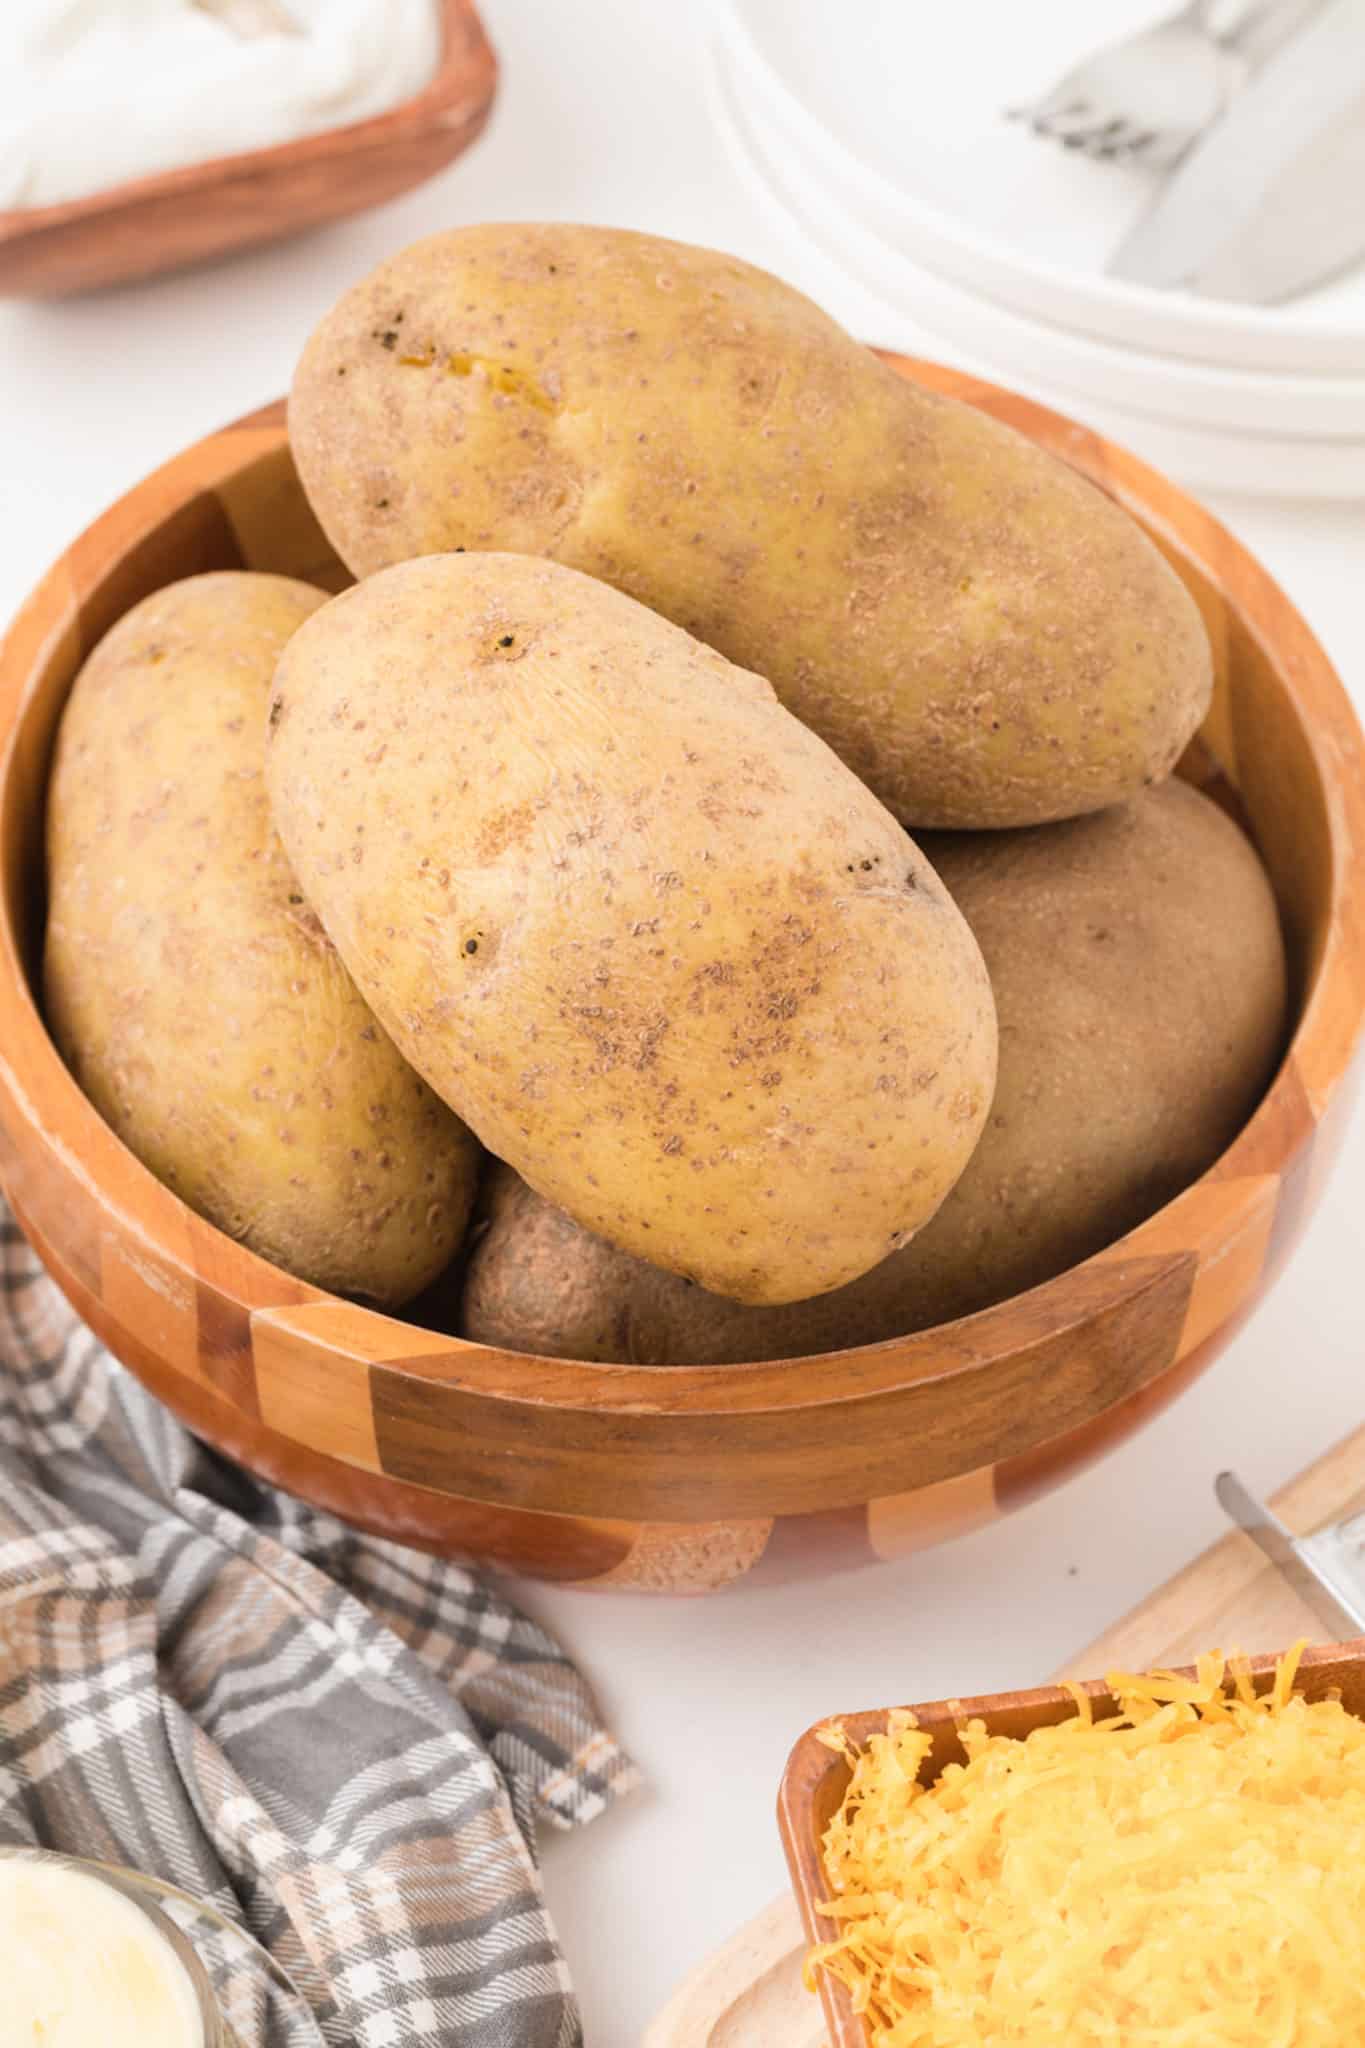 bowl of baked potatoes on a table